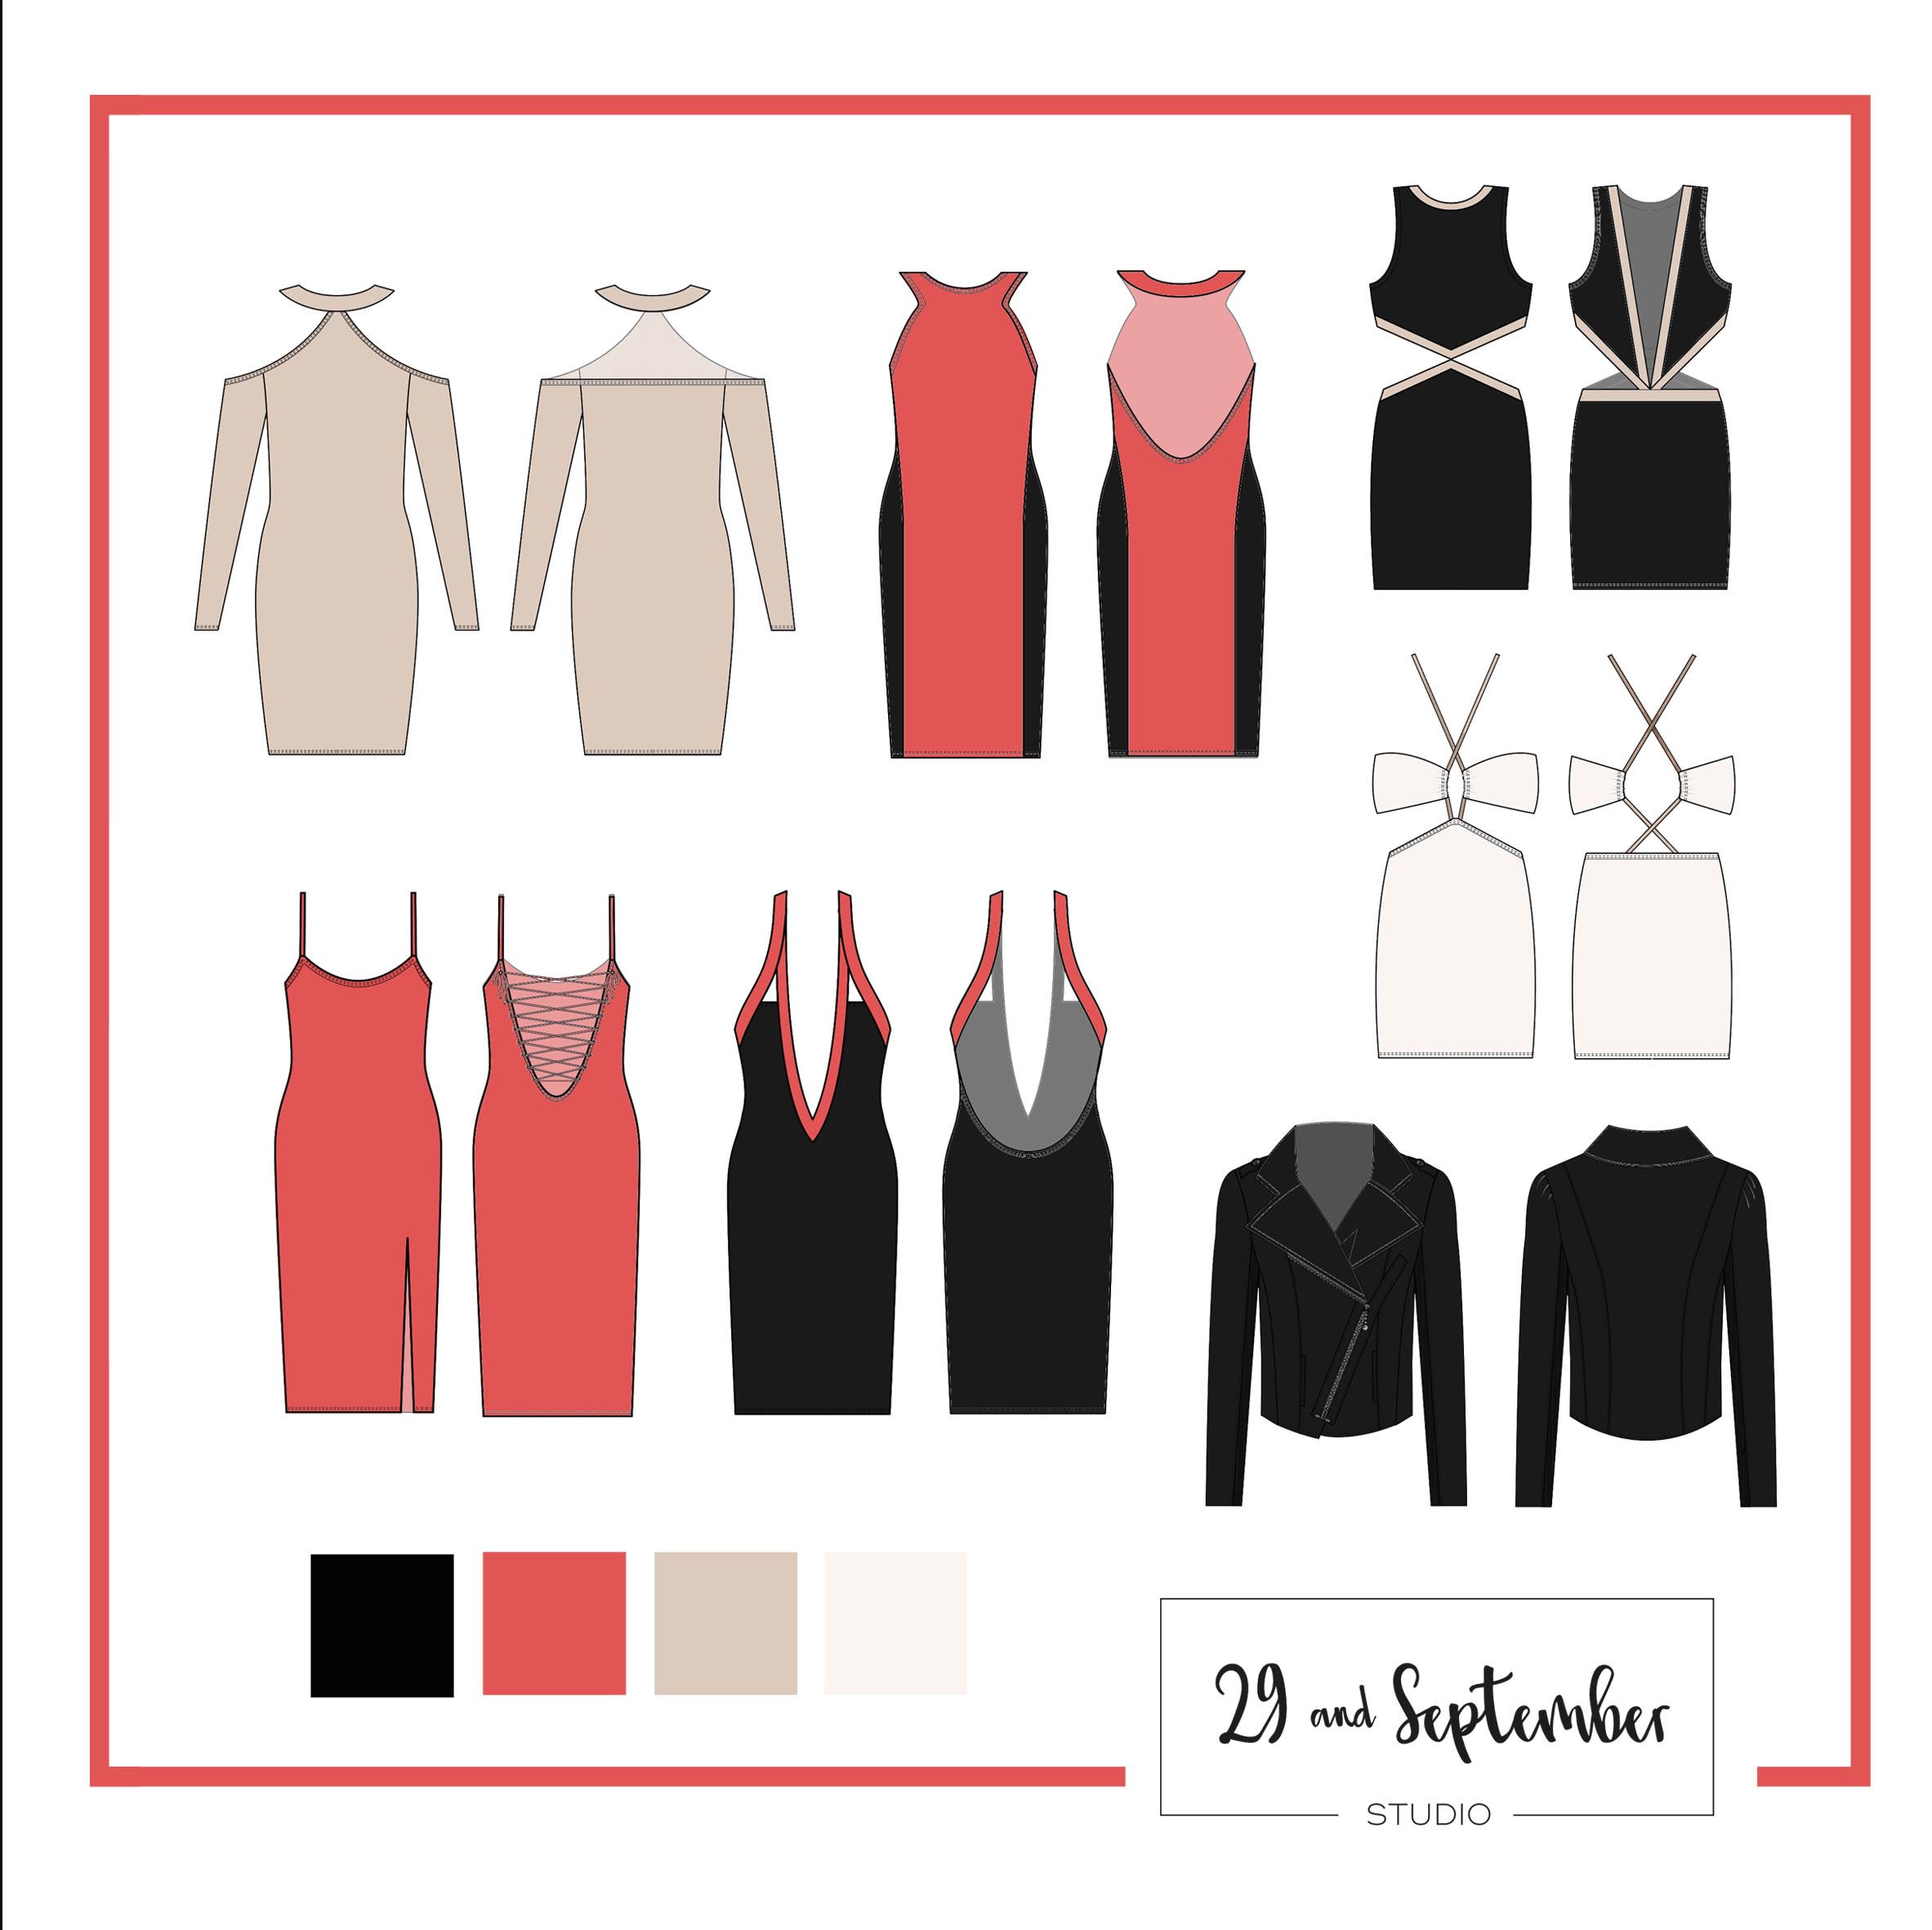 How many items should I have in my fashion range? — The Fashion